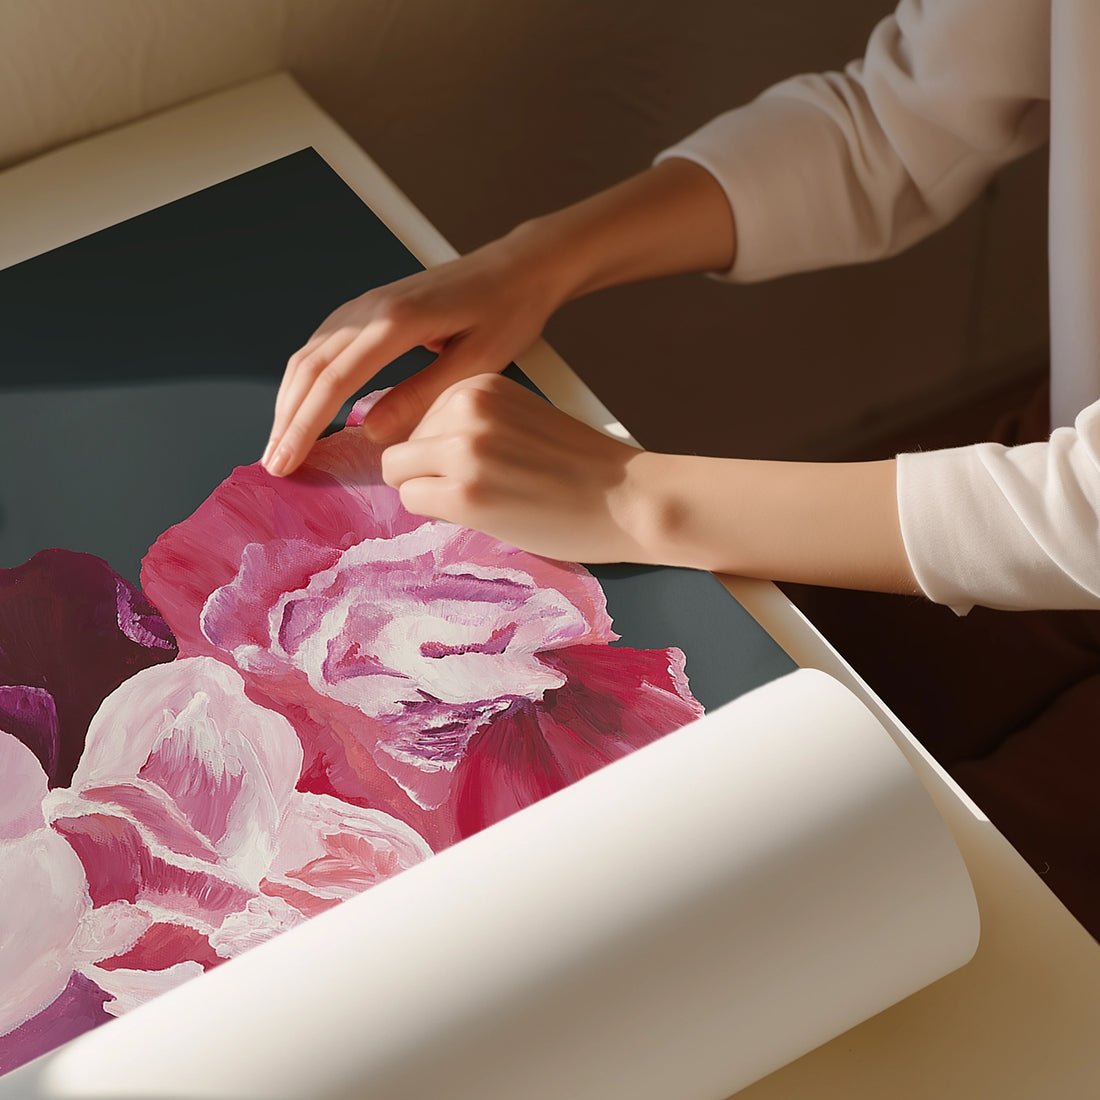 Woman painting flowers for Balanced fine art print collection.